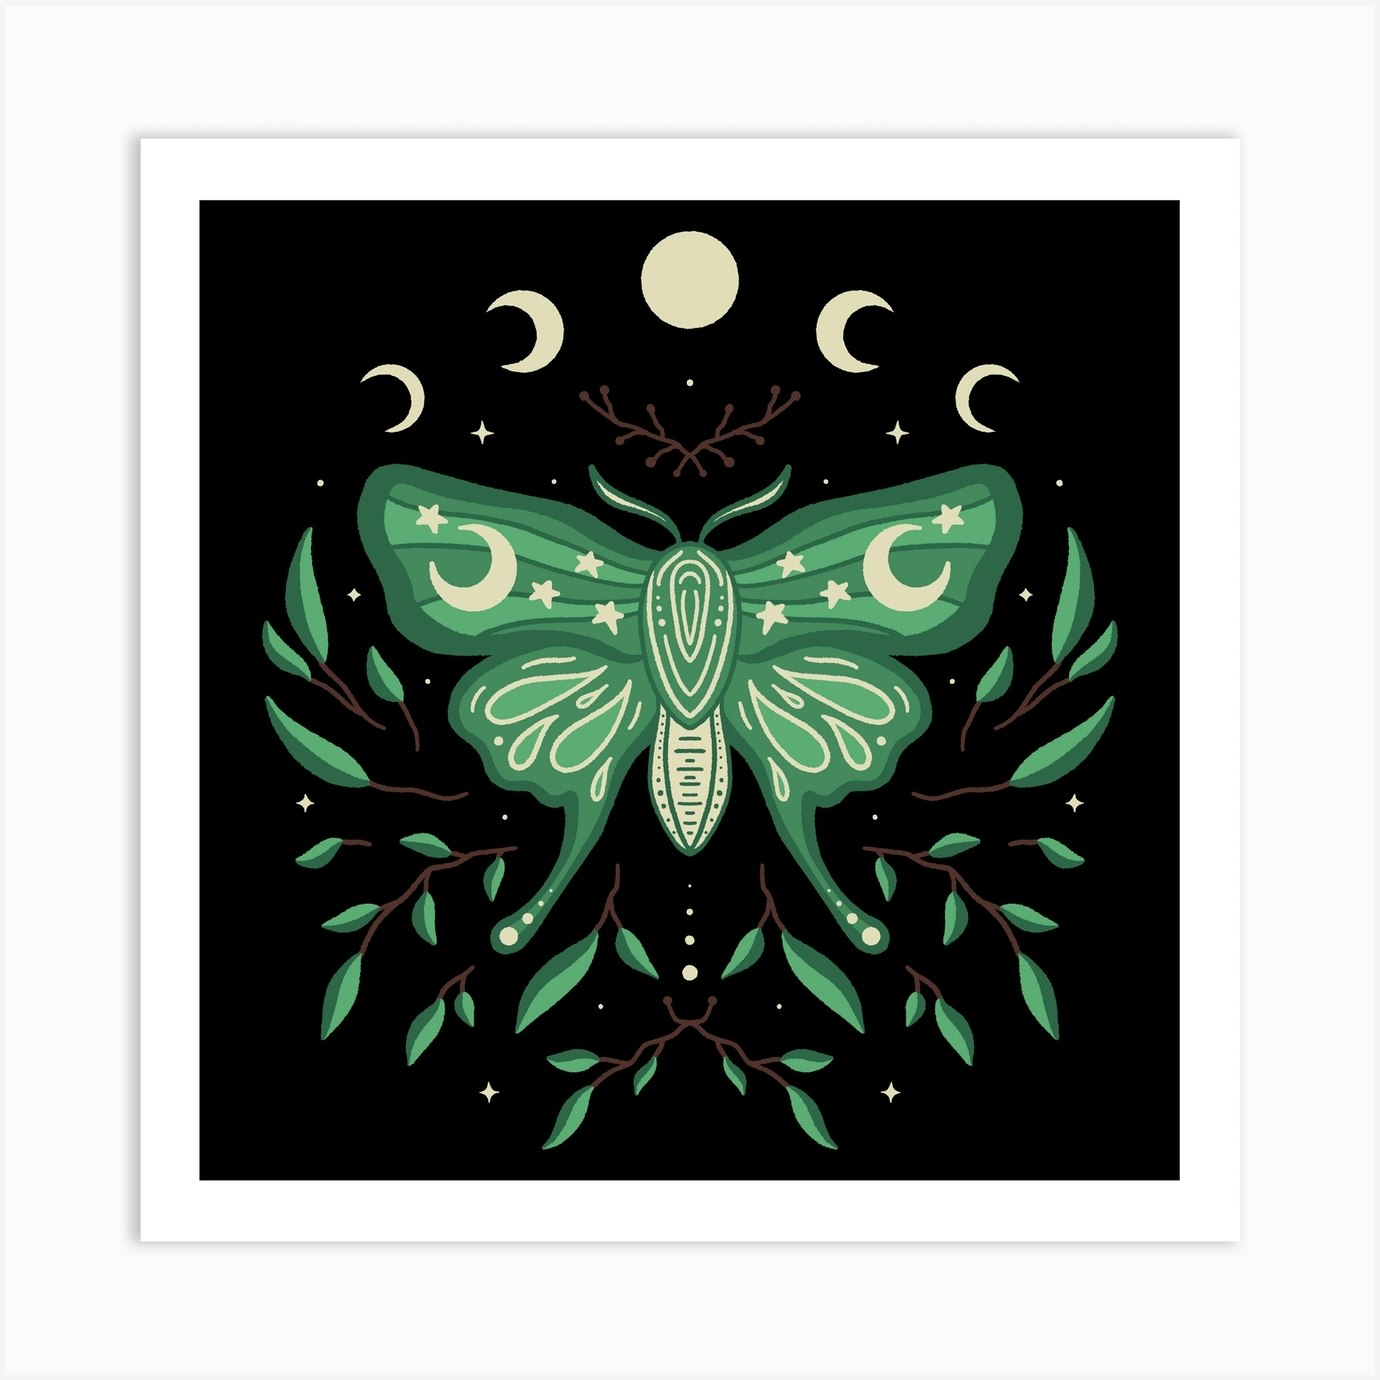 The Nest: Free printable moon phase art and pattern downloads and